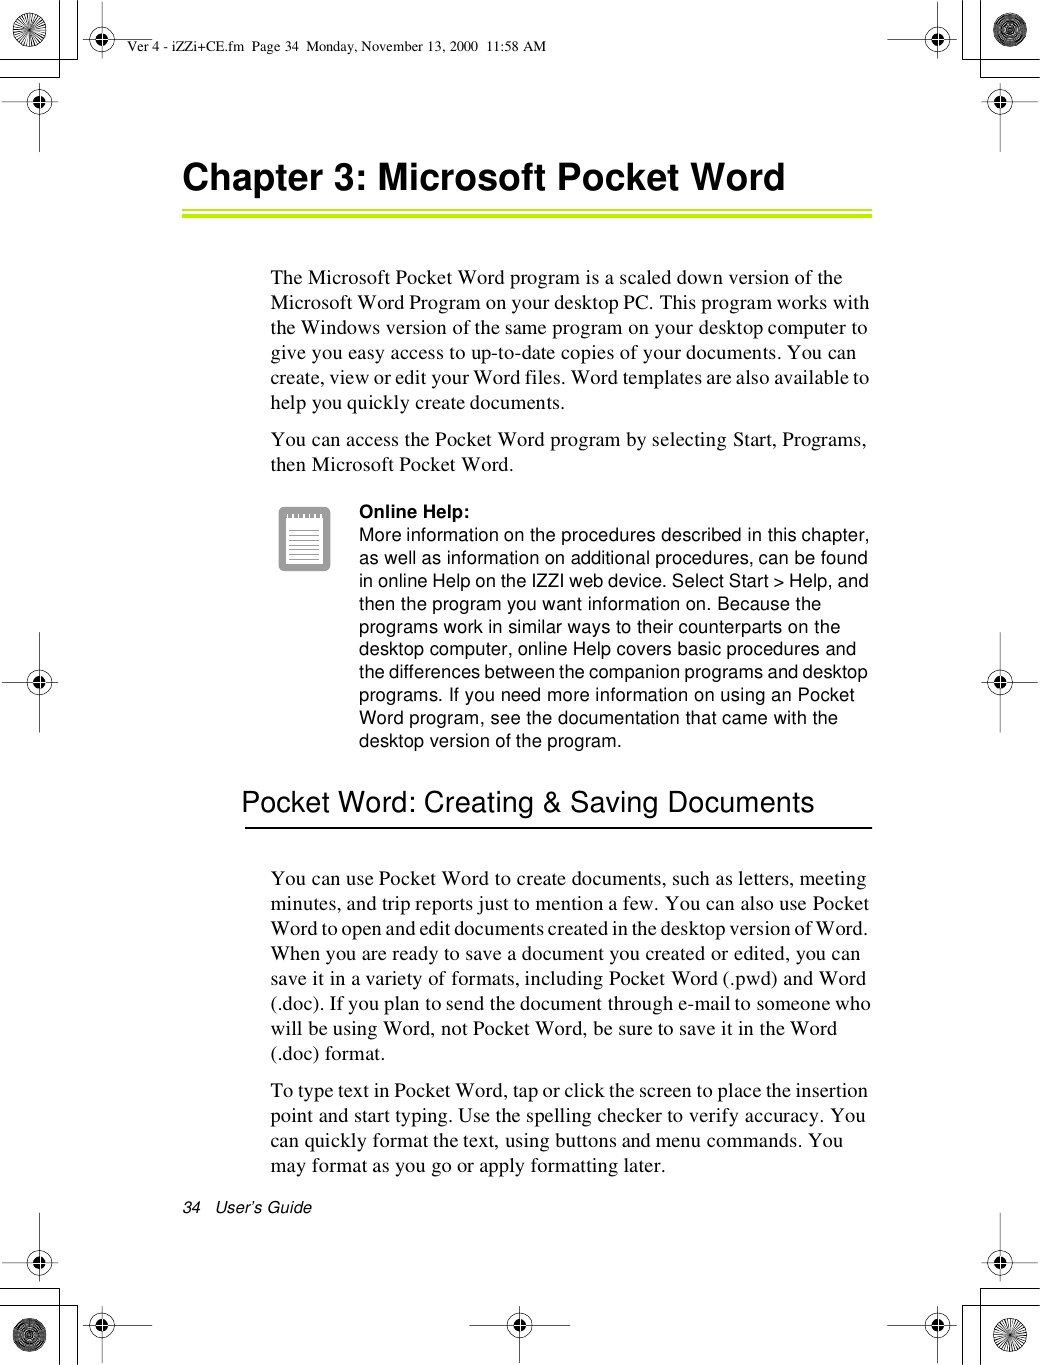 34 User’s GuideChapter 3:Microsoft Pocket WordThe Microsoft Pocket Word program is a scaled down version of theMicrosoft Word Program on your desktop PC. This program works withthe Windows version of the same program on your desktop computer togive you easy access to up-to-date copies of your documents. You cancreate, view or edit your Word files. Word templates are also available tohelp you quickly create documents.You can access the Pocket Word program by selecting Start, Programs,then Microsoft Pocket Word.Online Help:More information on the procedures described in this chapter,as well as information on additional procedures, can be foundin online Help on the IZZI web device. Select Start &gt; Help, andthen the program you want information on. Because theprograms work in similar ways to their counterparts on thedesktop computer, online Help covers basic procedures andthe differences between the companion programs and desktopprograms. If you need more information on using an PocketWord program, see the documentation that came with thedesktop version of the program.Pocket Word: Creating &amp; Saving DocumentsYou can use Pocket Word to create documents, such as letters, meetingminutes, and trip reports just to mention a few. You can also use PocketWord to open and edit documents created in the desktop version of Word.When you are ready to save a document you created or edited, you cansave it in a variety of formats, including Pocket Word (.pwd) and Word(.doc). If you plan to send the document through e-mail to someone whowill be using Word, not Pocket Word, be sure to save it in the Word(.doc) format.To type text in Pocket Word, tap or click the screen to place the insertionpoint and start typing. Use the spelling checker to verify accuracy. Youcan quickly format the text, using buttons and menu commands. Youmay format as you go or apply formatting later.Ver 4 - iZZi+CE.fm Page 34 Monday, November 13, 2000 11:58 AM